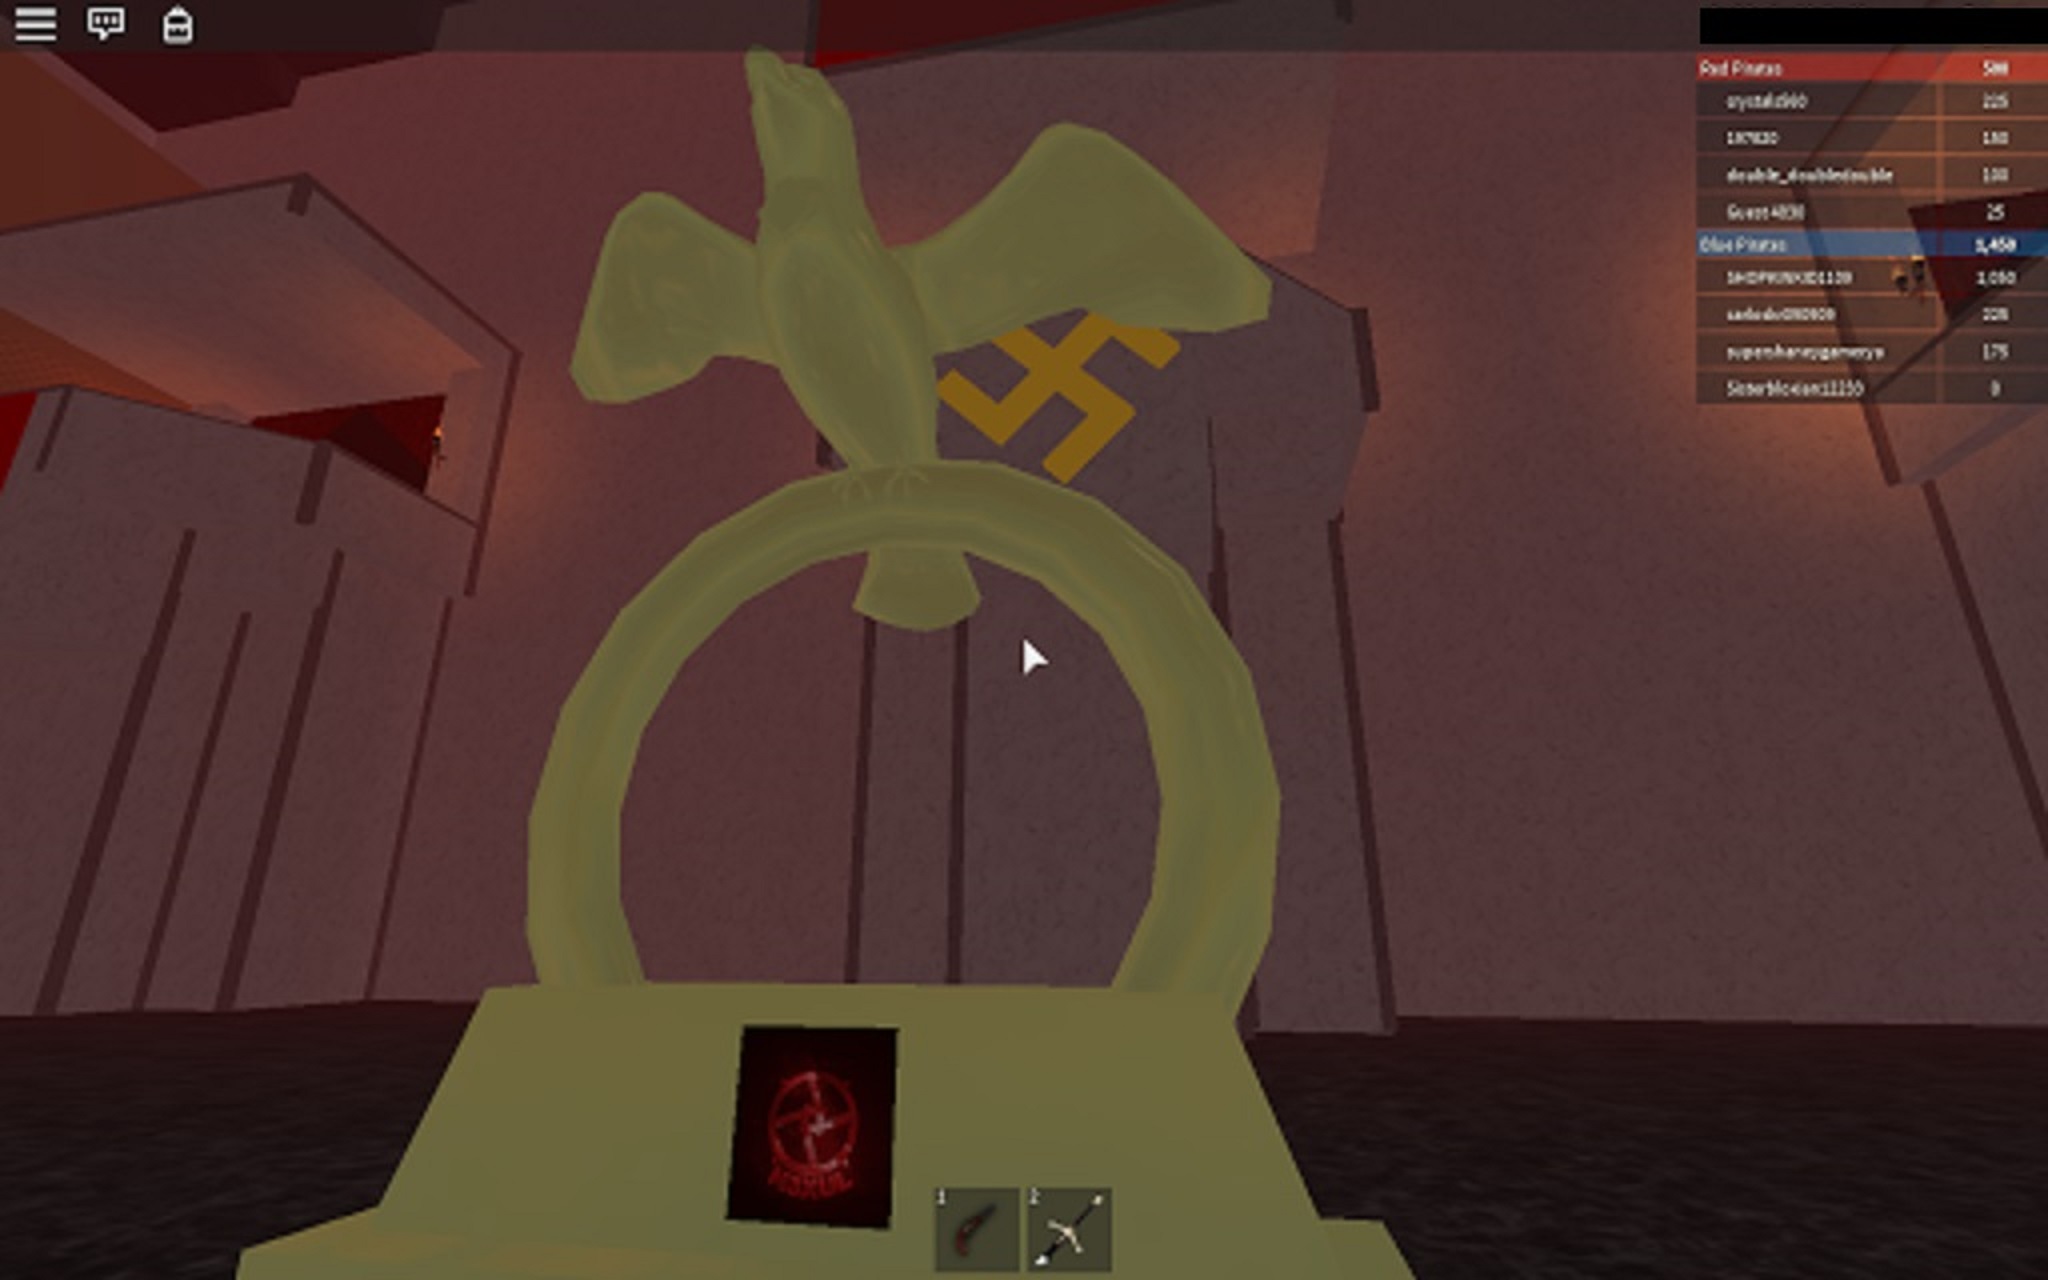 Porn And Swastikas Have Infiltrated Roblox